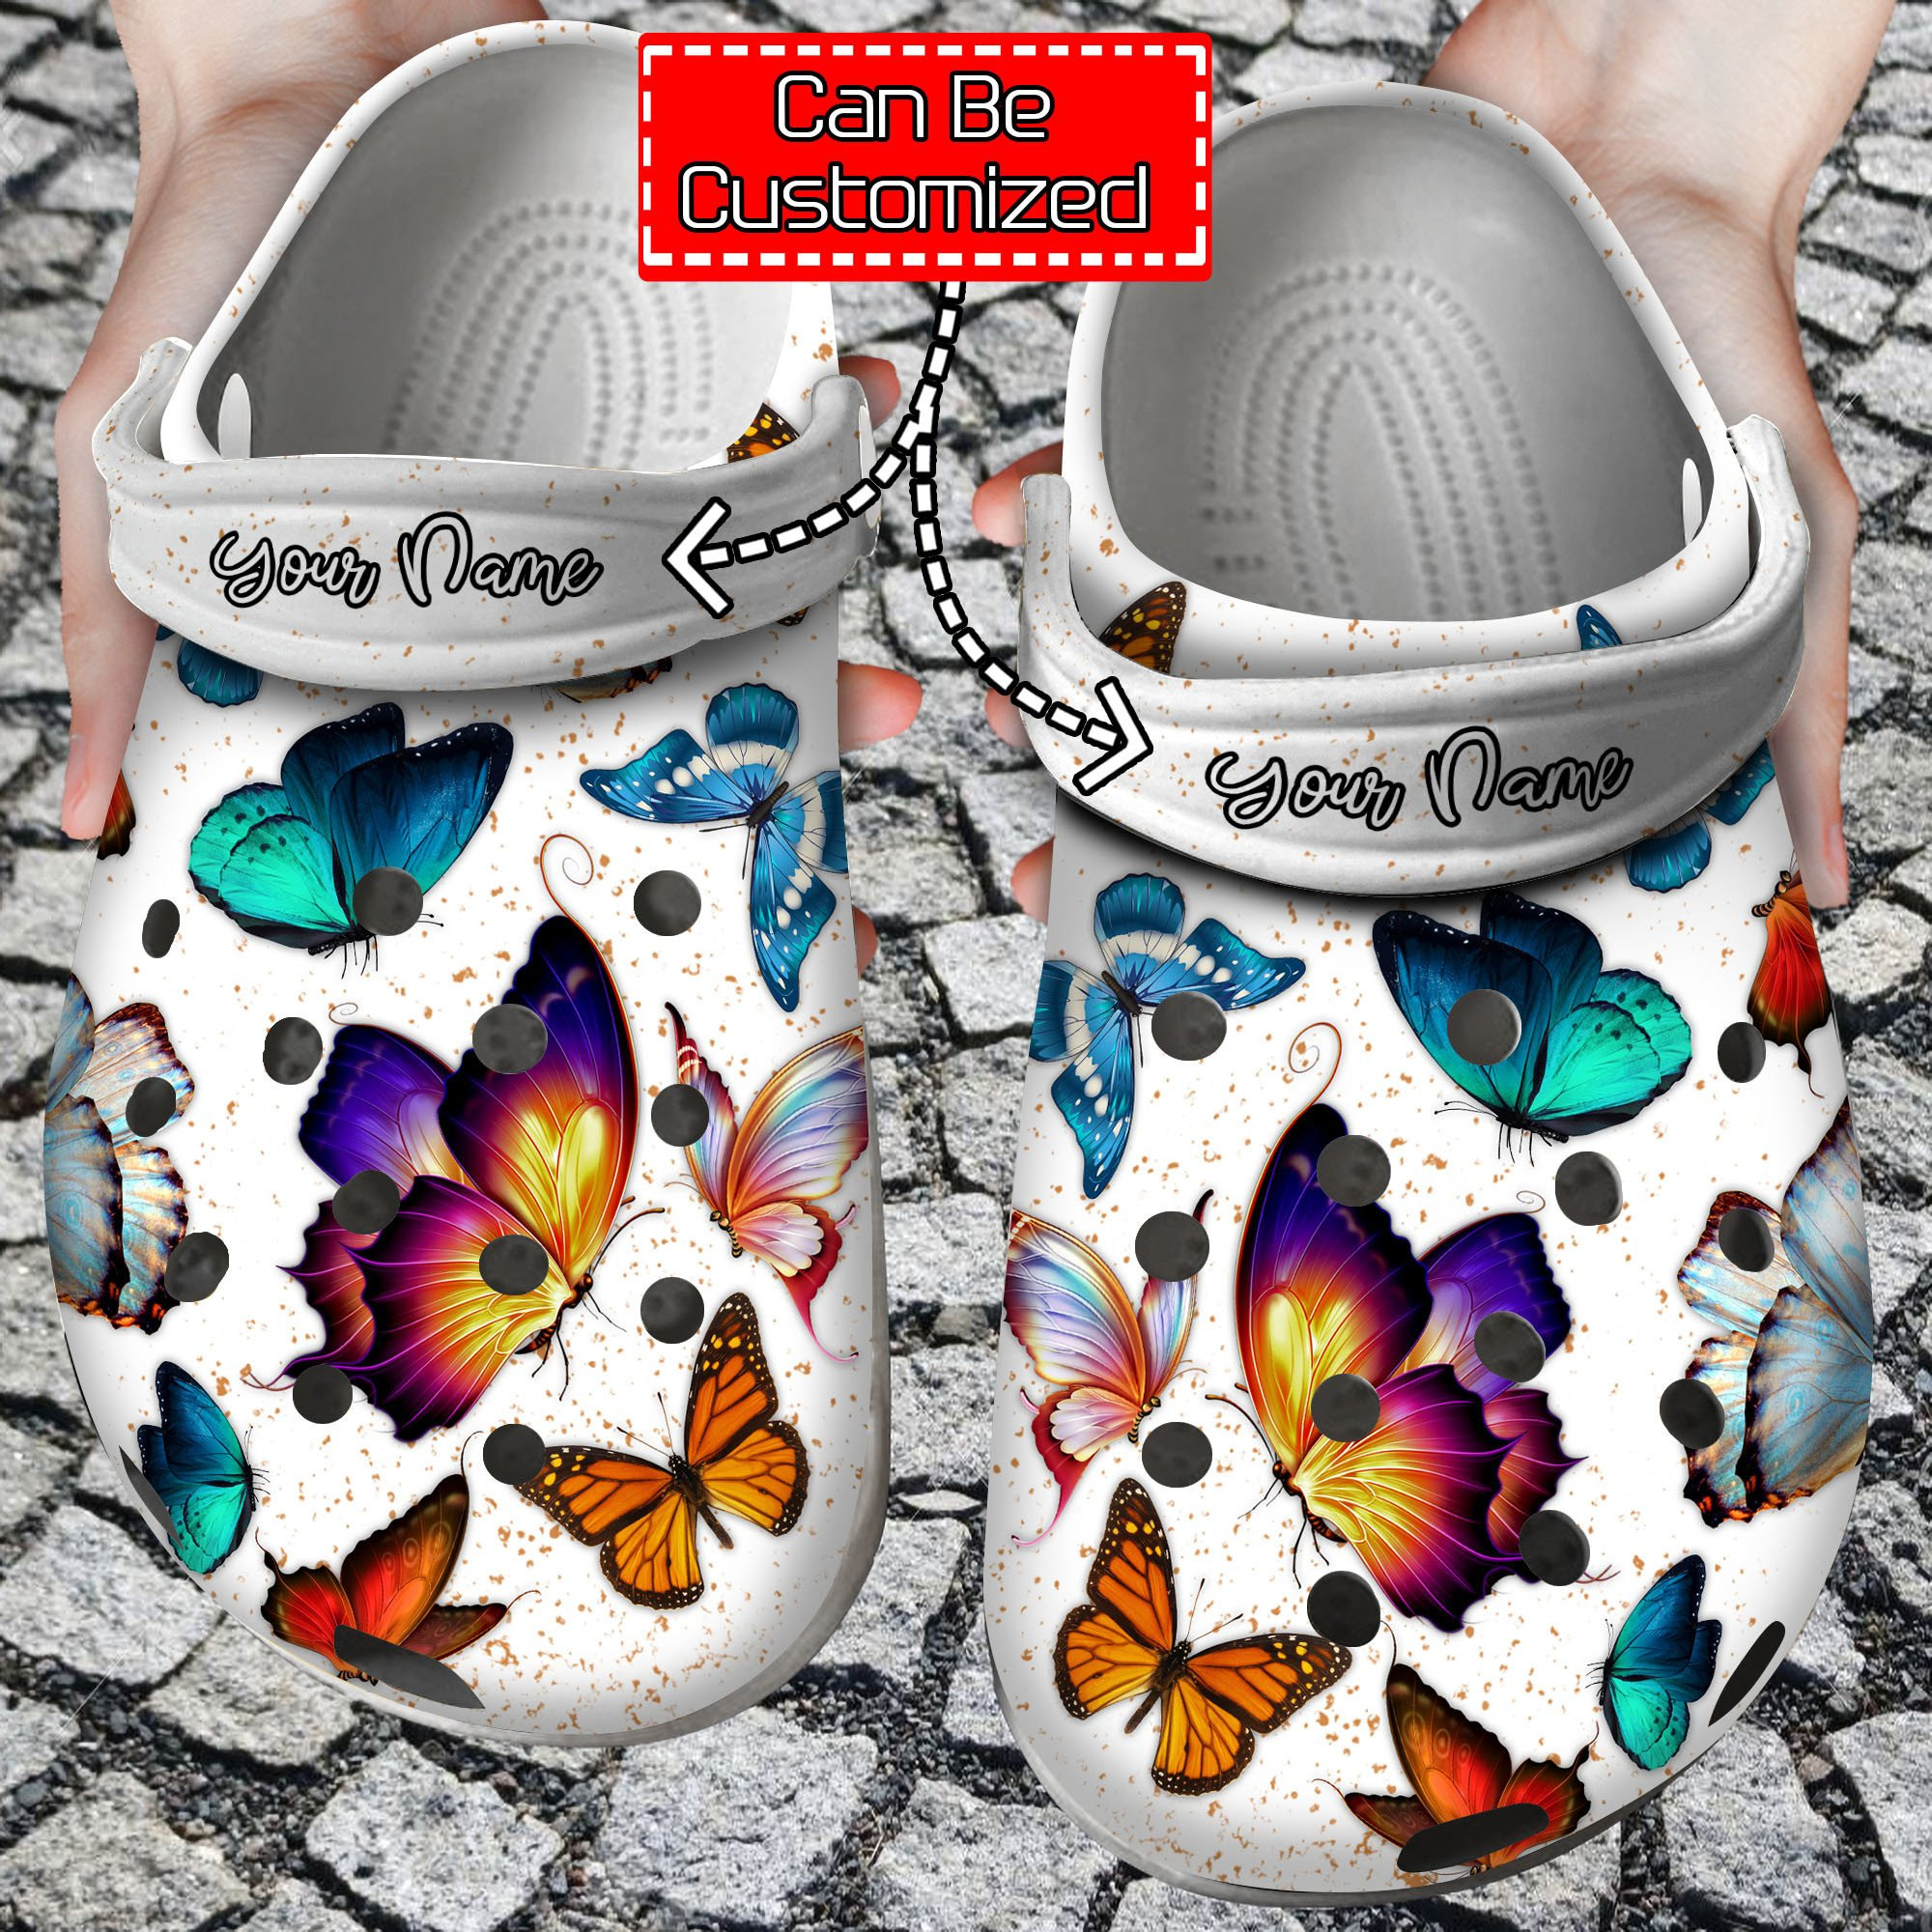 Animal Crocs Personalized Butterfly Lovers Clog Shoes